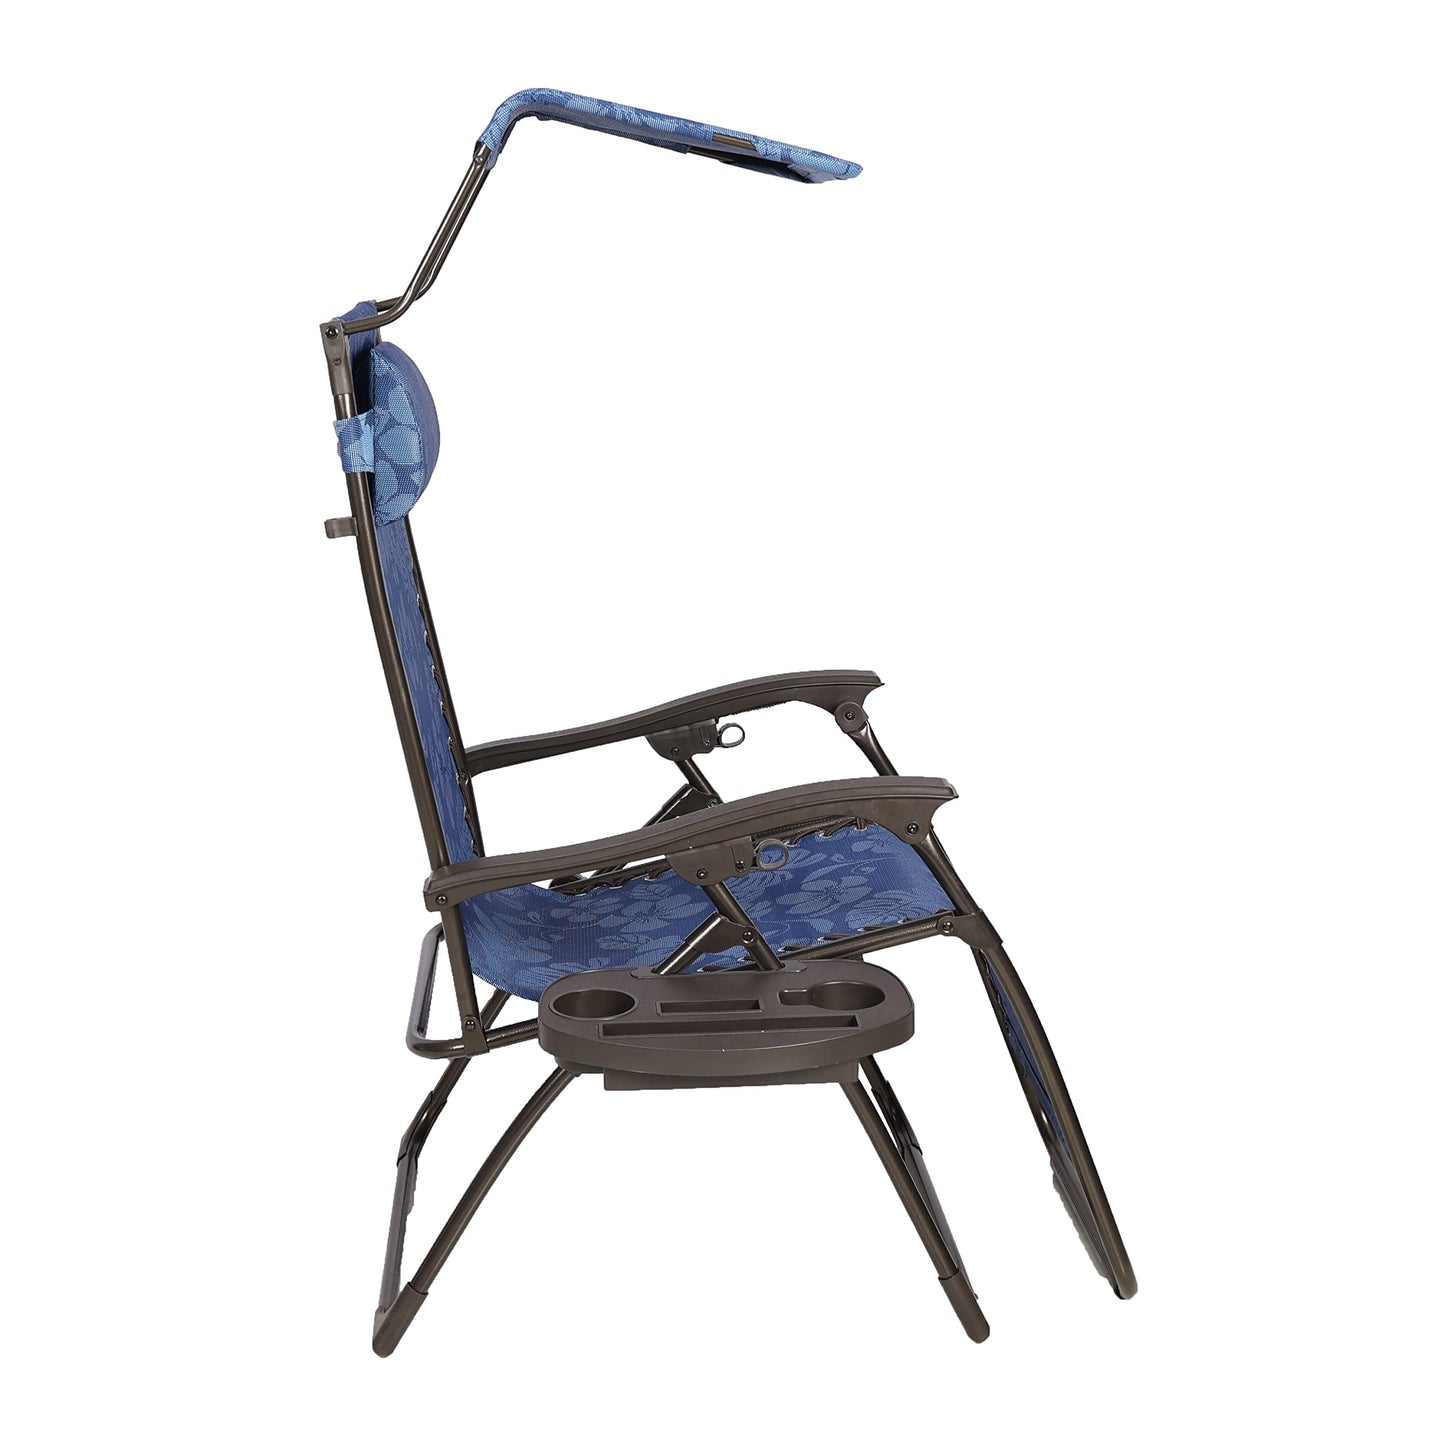 26" Wide Base Model Zero Gravity Chair w/ Canopy, Pillow, & Drink Tray Folding Outdoor Lawn, Deck, Patio Adjustable Lounge Chair, 300lbs. Weather and Rust Resistant, Blue Flower Single Pack 26-Inch